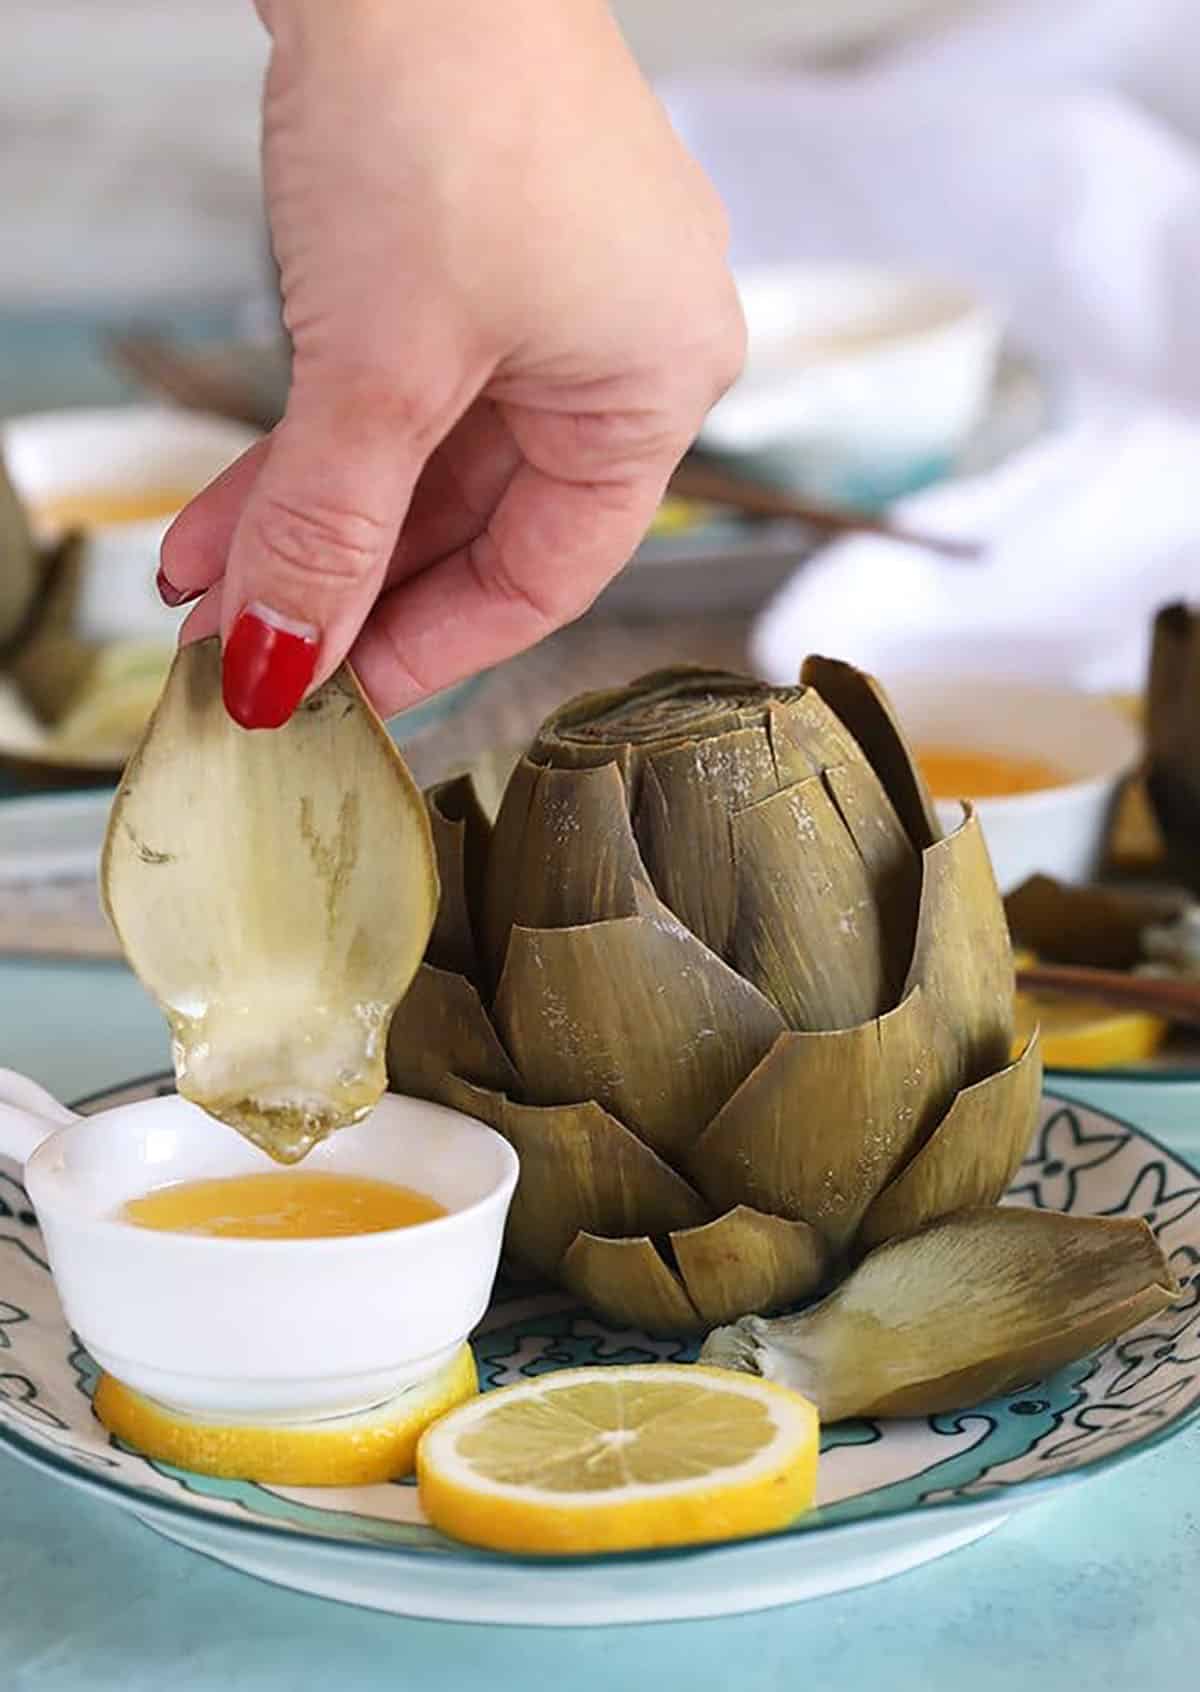 Instant Pot Artichoke on a plate with a hand dipping a leaf into melted butter.